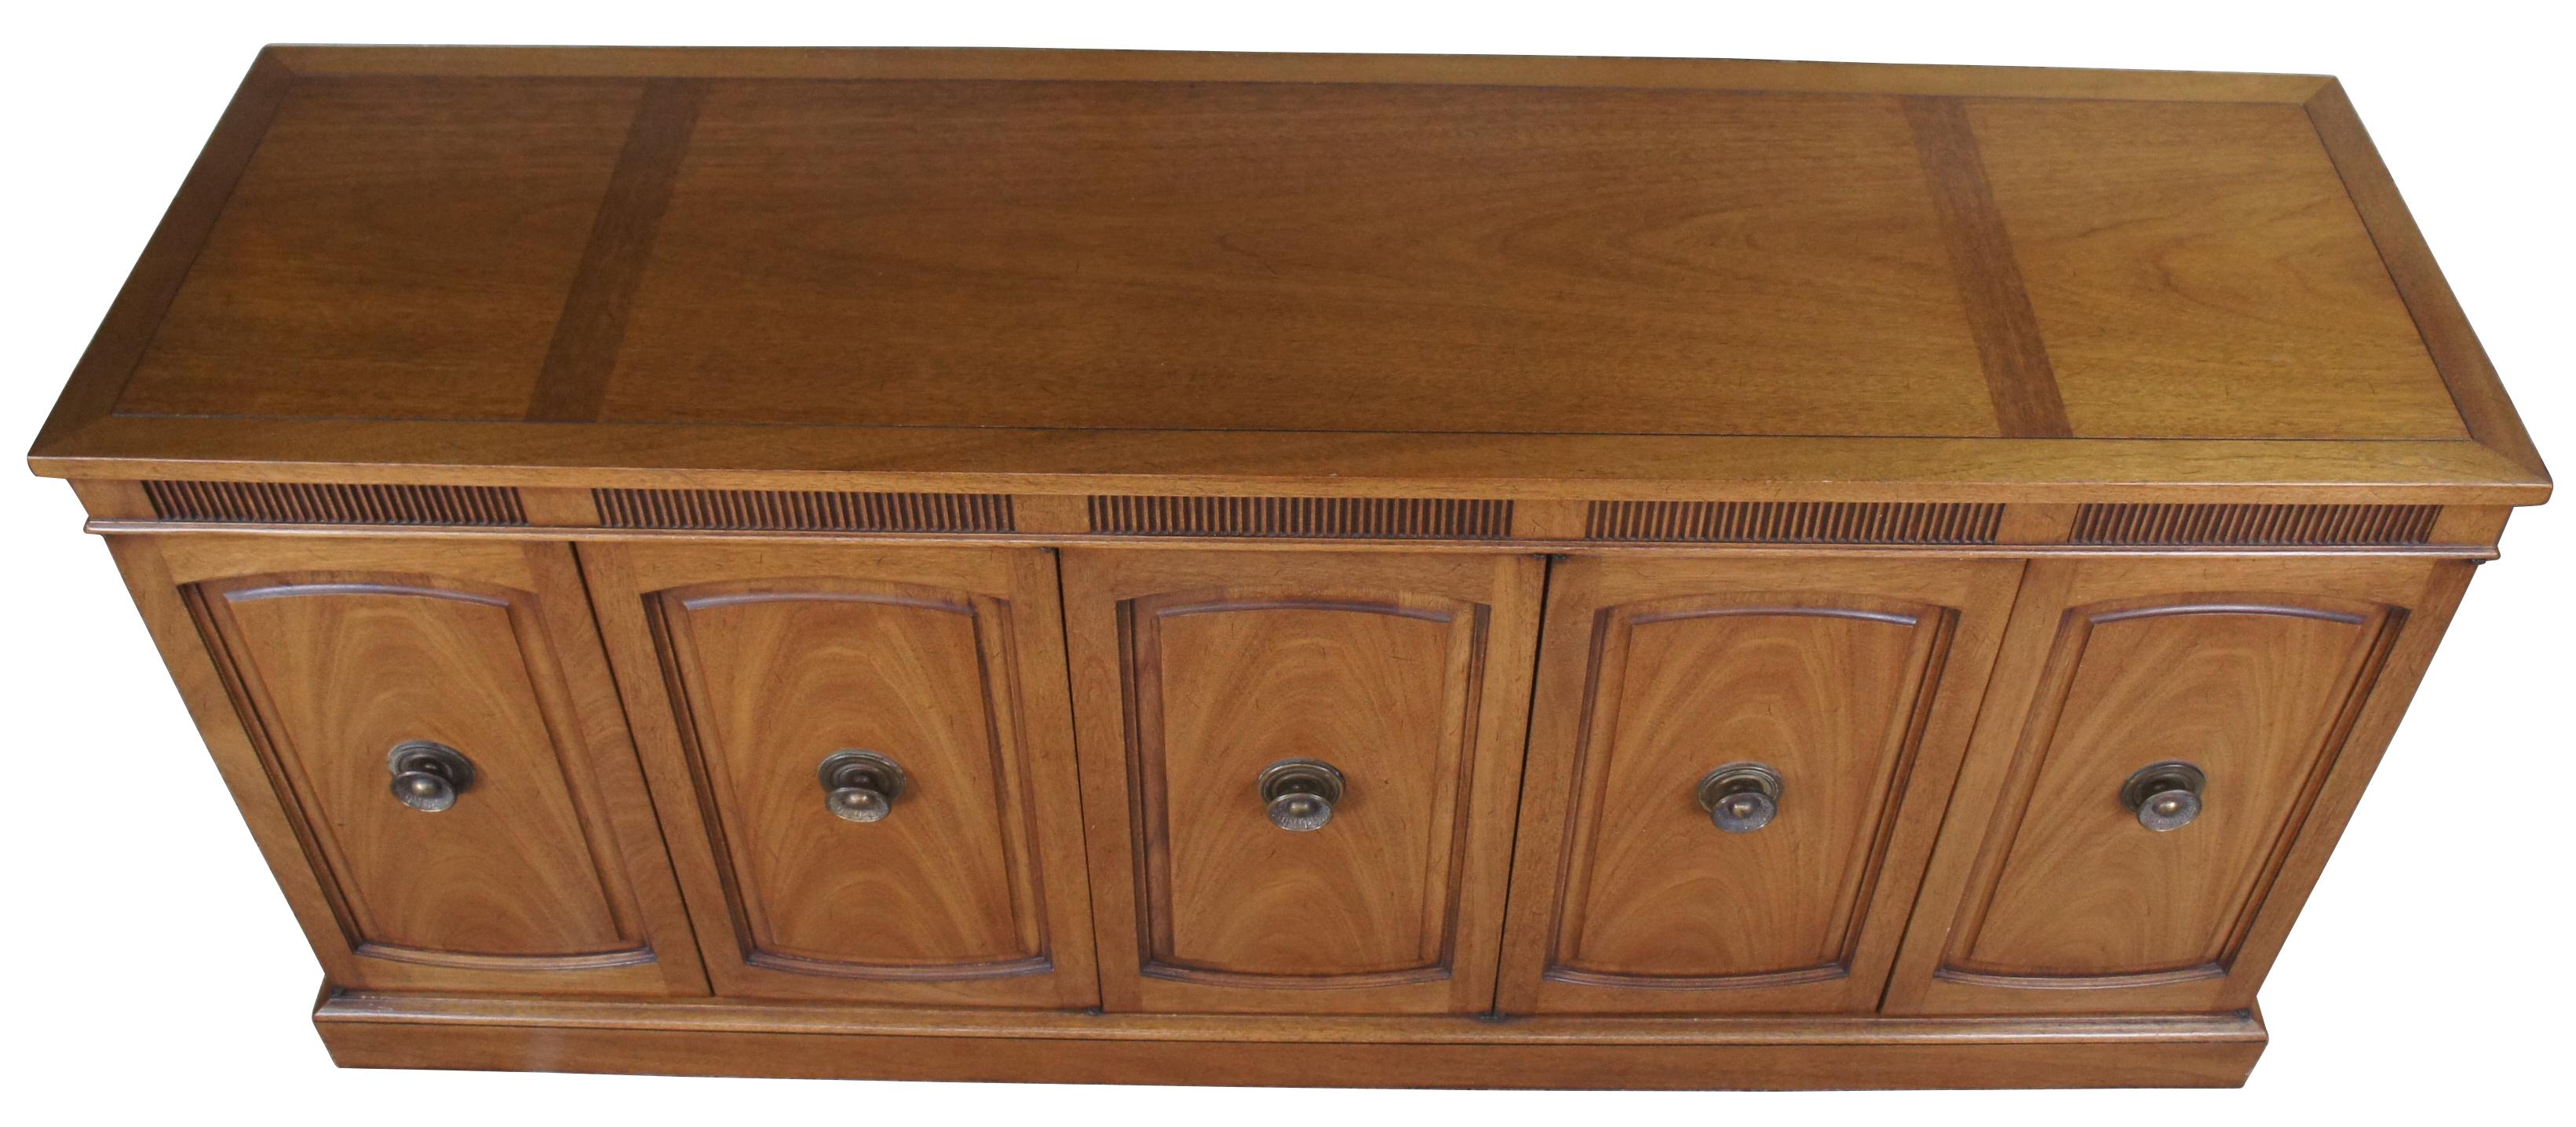 Italian Provincial sideboard/ server by Drexel Heritage, circa 1961. Part of their Triune collection, finished in Mahogany. Features a rectangular form sporting a Tuscan inspired design with a fluted apron, paneled doors and brass hardware. Includes